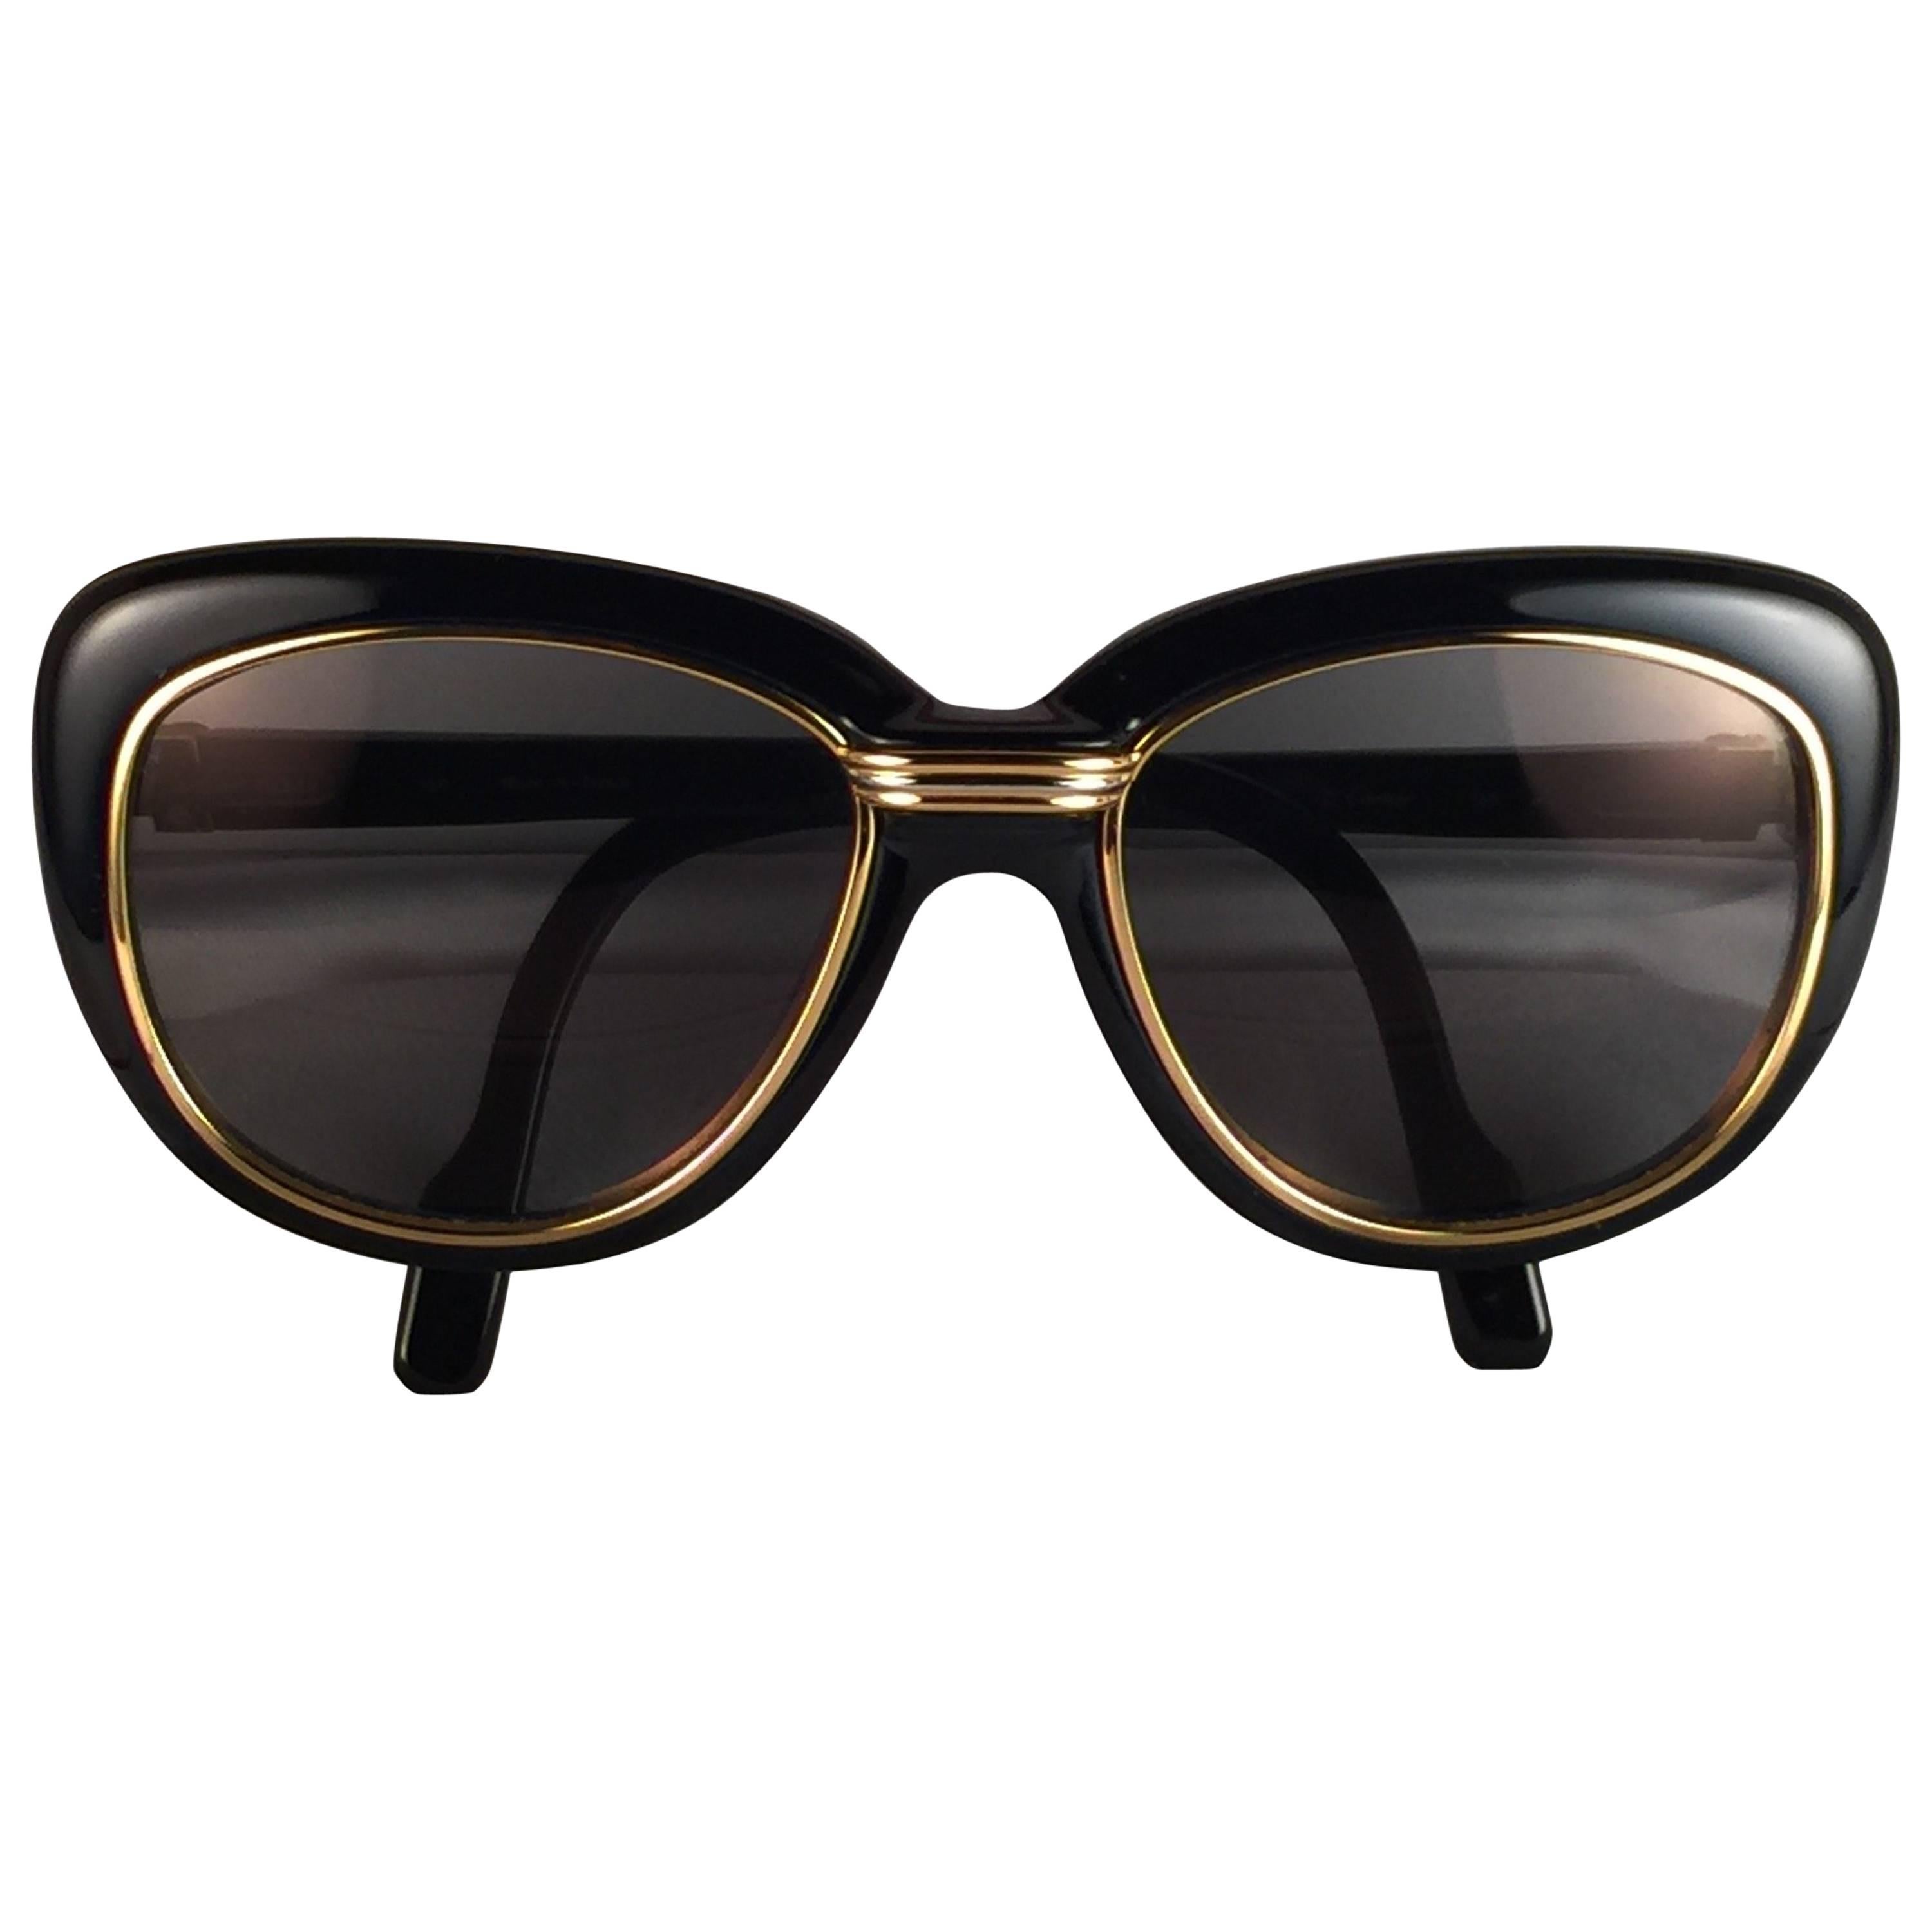 Cartier France Vintage Conquete 51mm Black Gold and Yellow Inserts Sunglasses